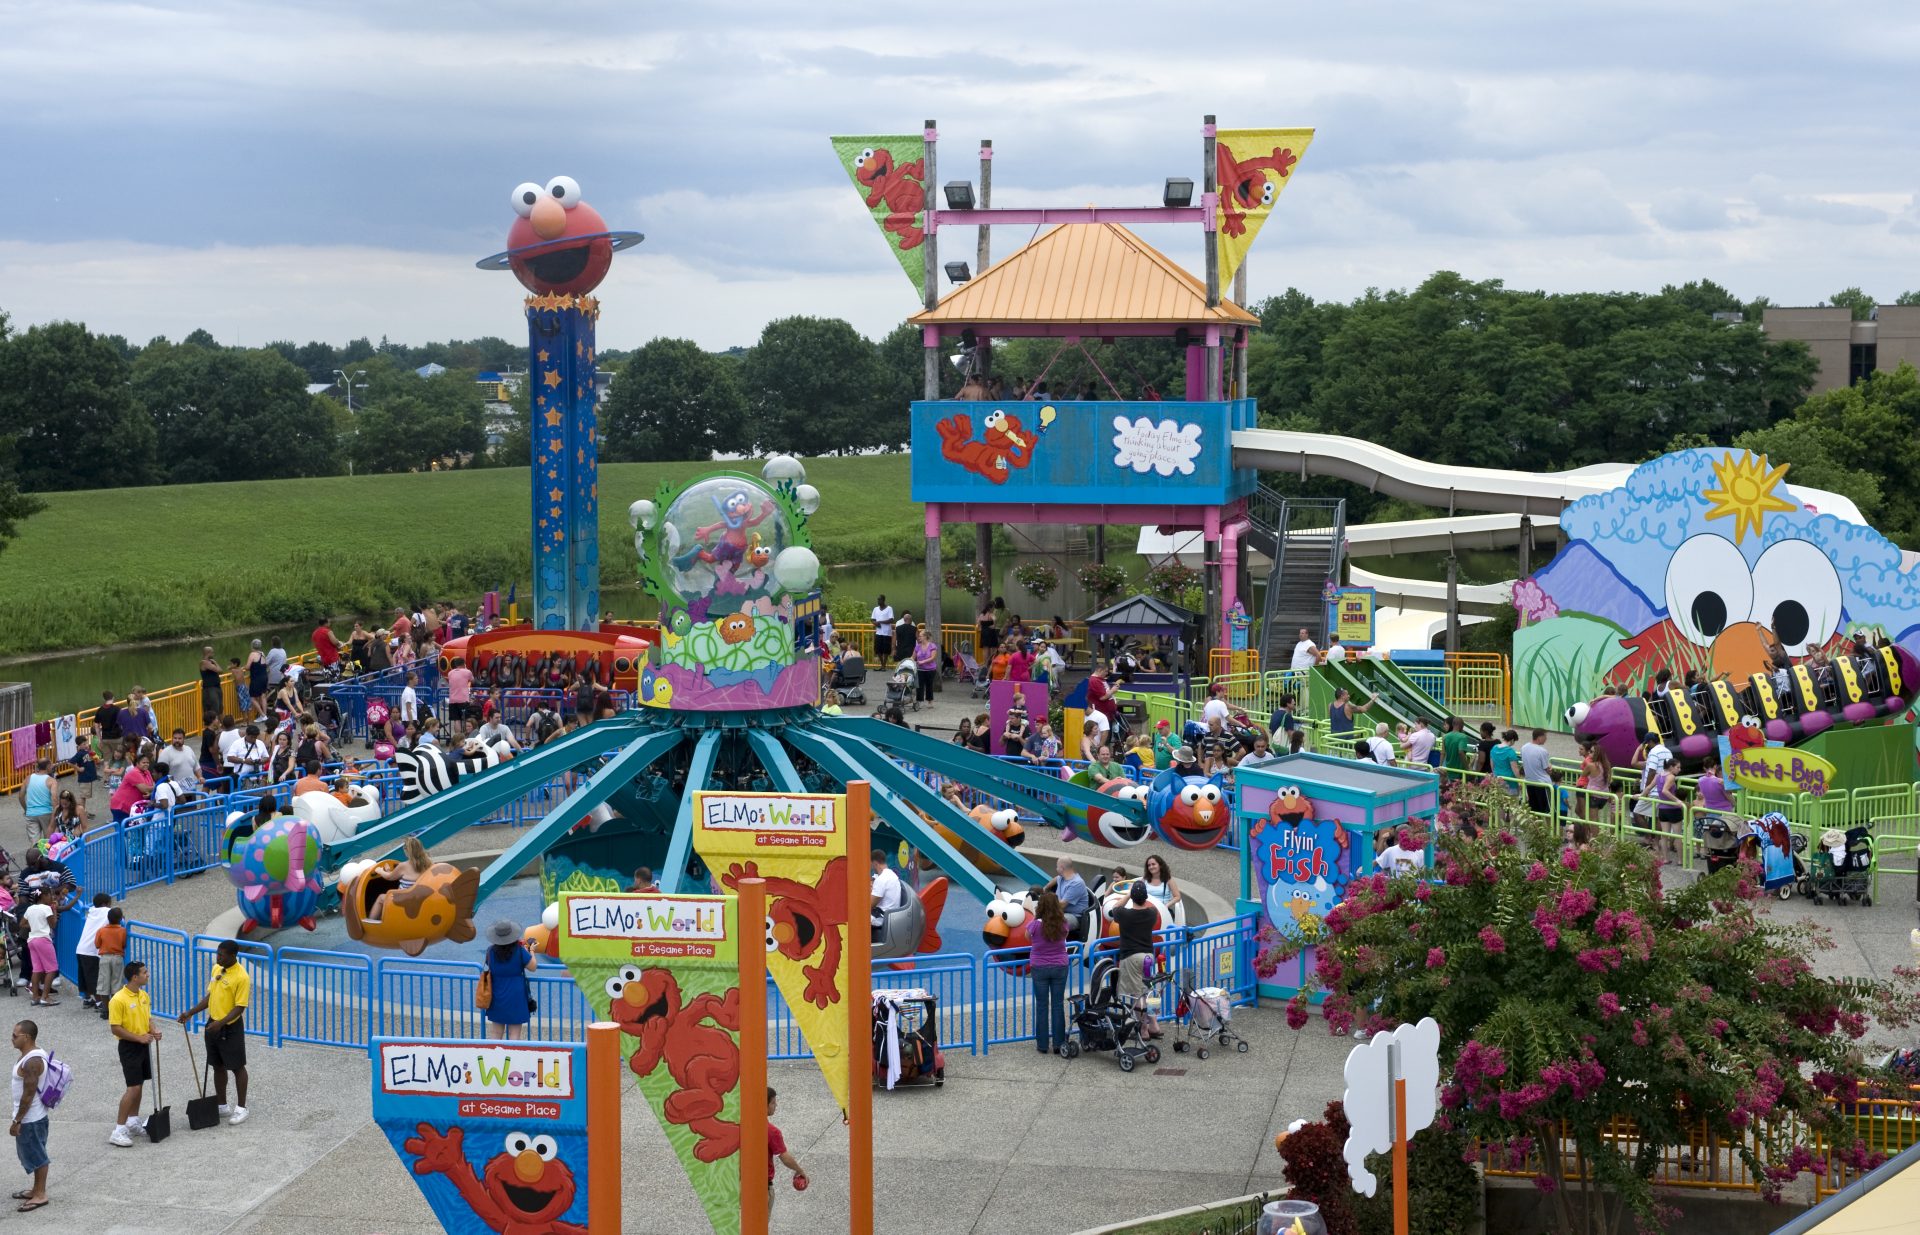 Baltimore family files a $25 million lawsuit against Sesame Place alleging racial discrimination against their daughter.